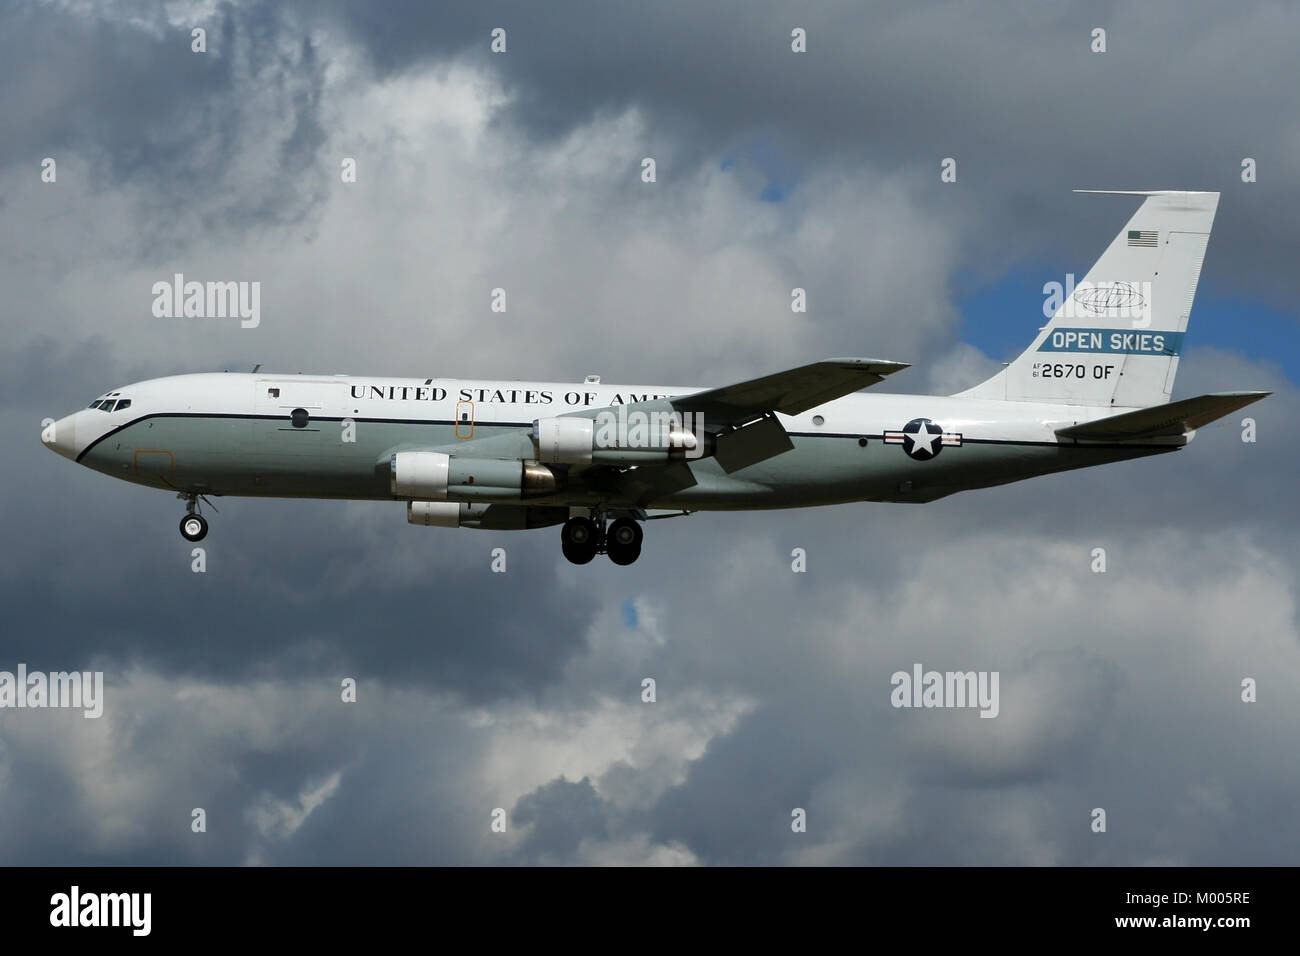 Landing in story skies, one of two converted OC-135's operated by the United States Air Force for the Open Skies Treaty arrives at Mildenhall. Stock Photo